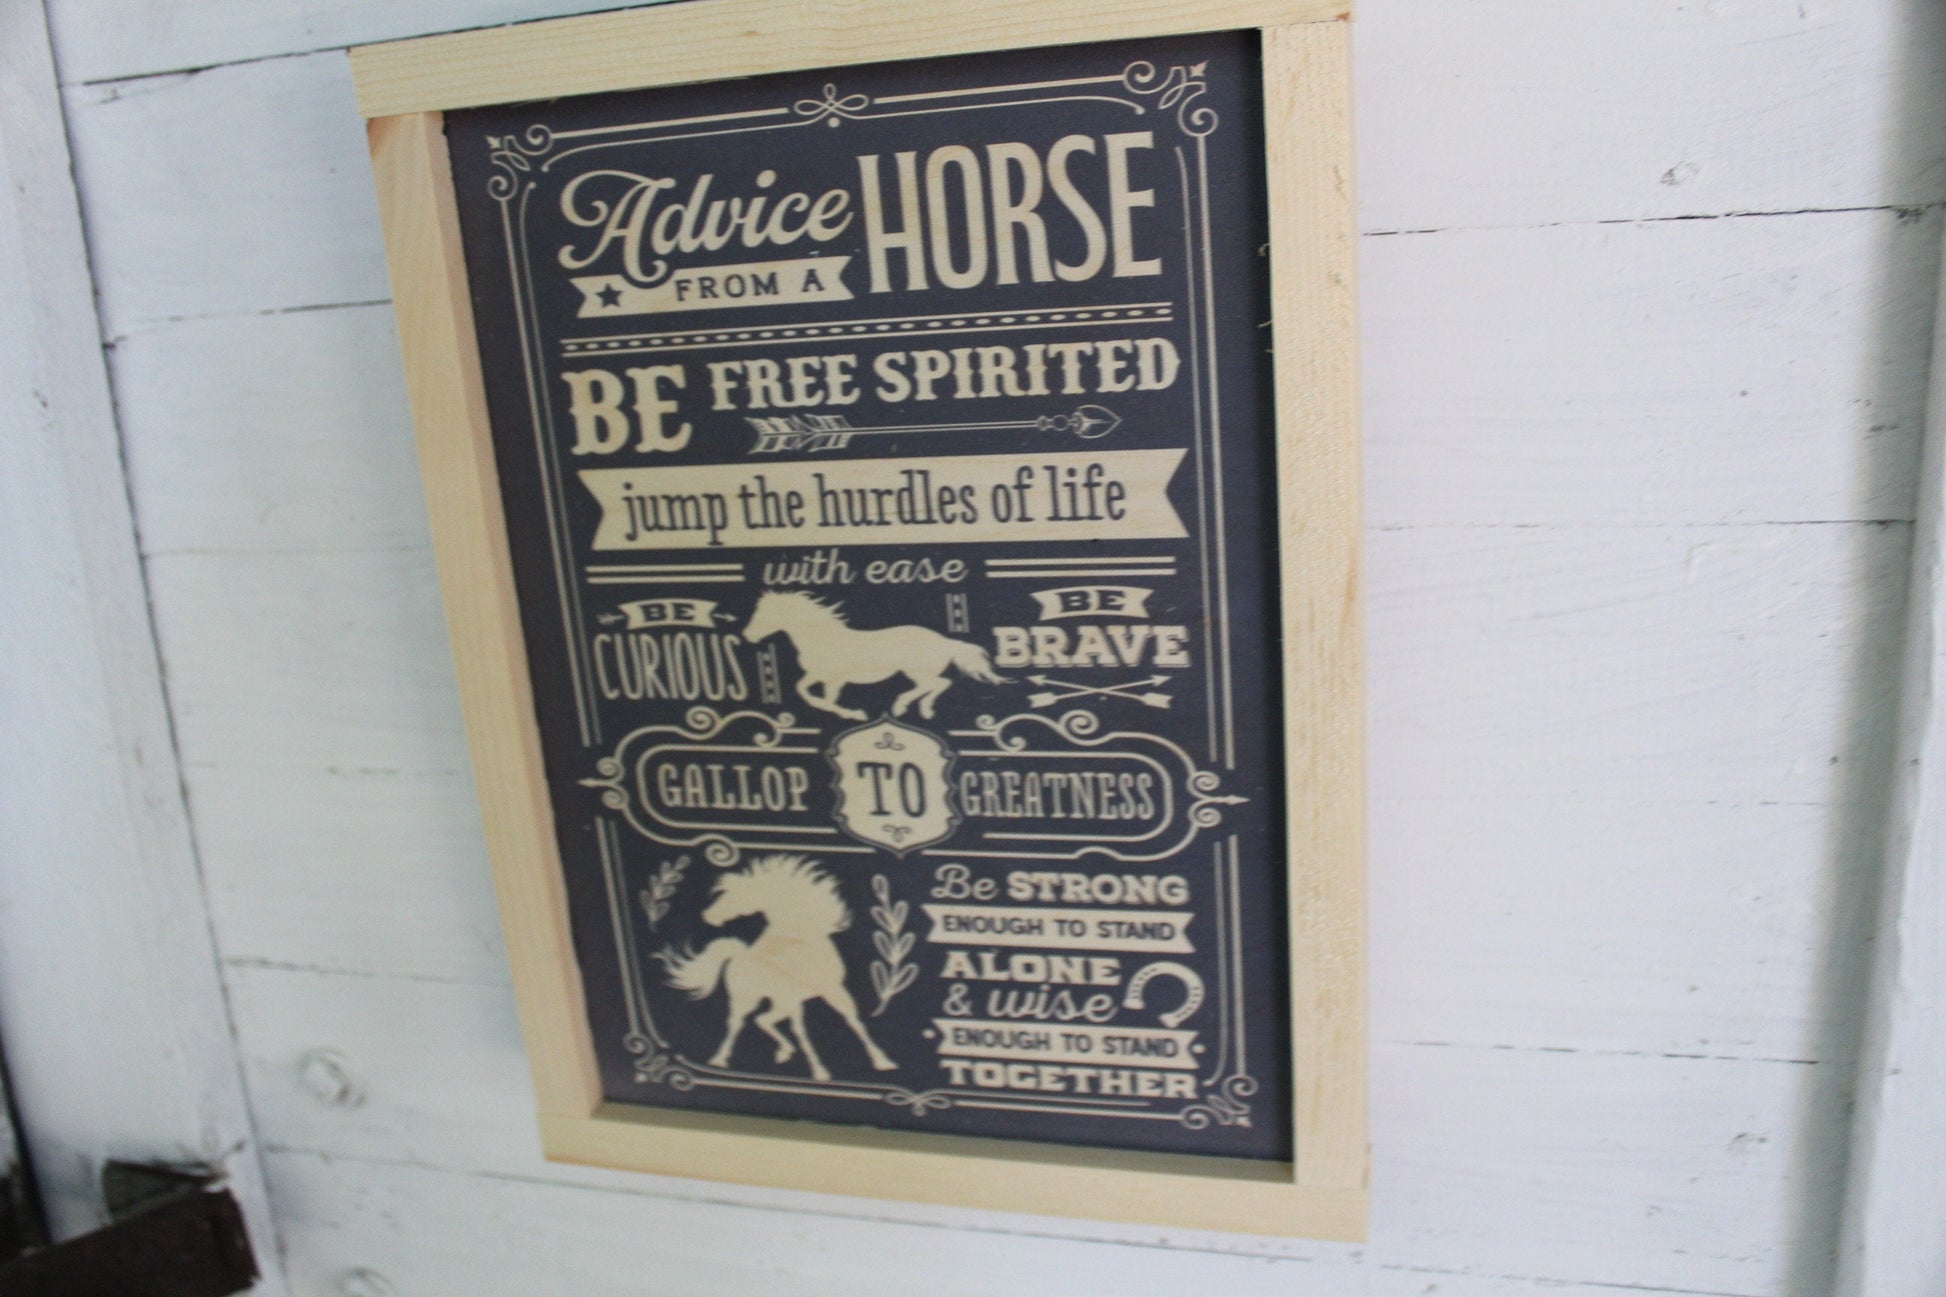 Horse Lover Gift Advice from a Horse Wood Sign Free Spirited Curious Brave Primitive Wall Hanging Strong Wise Blue Rustic Barn Gallop Pony